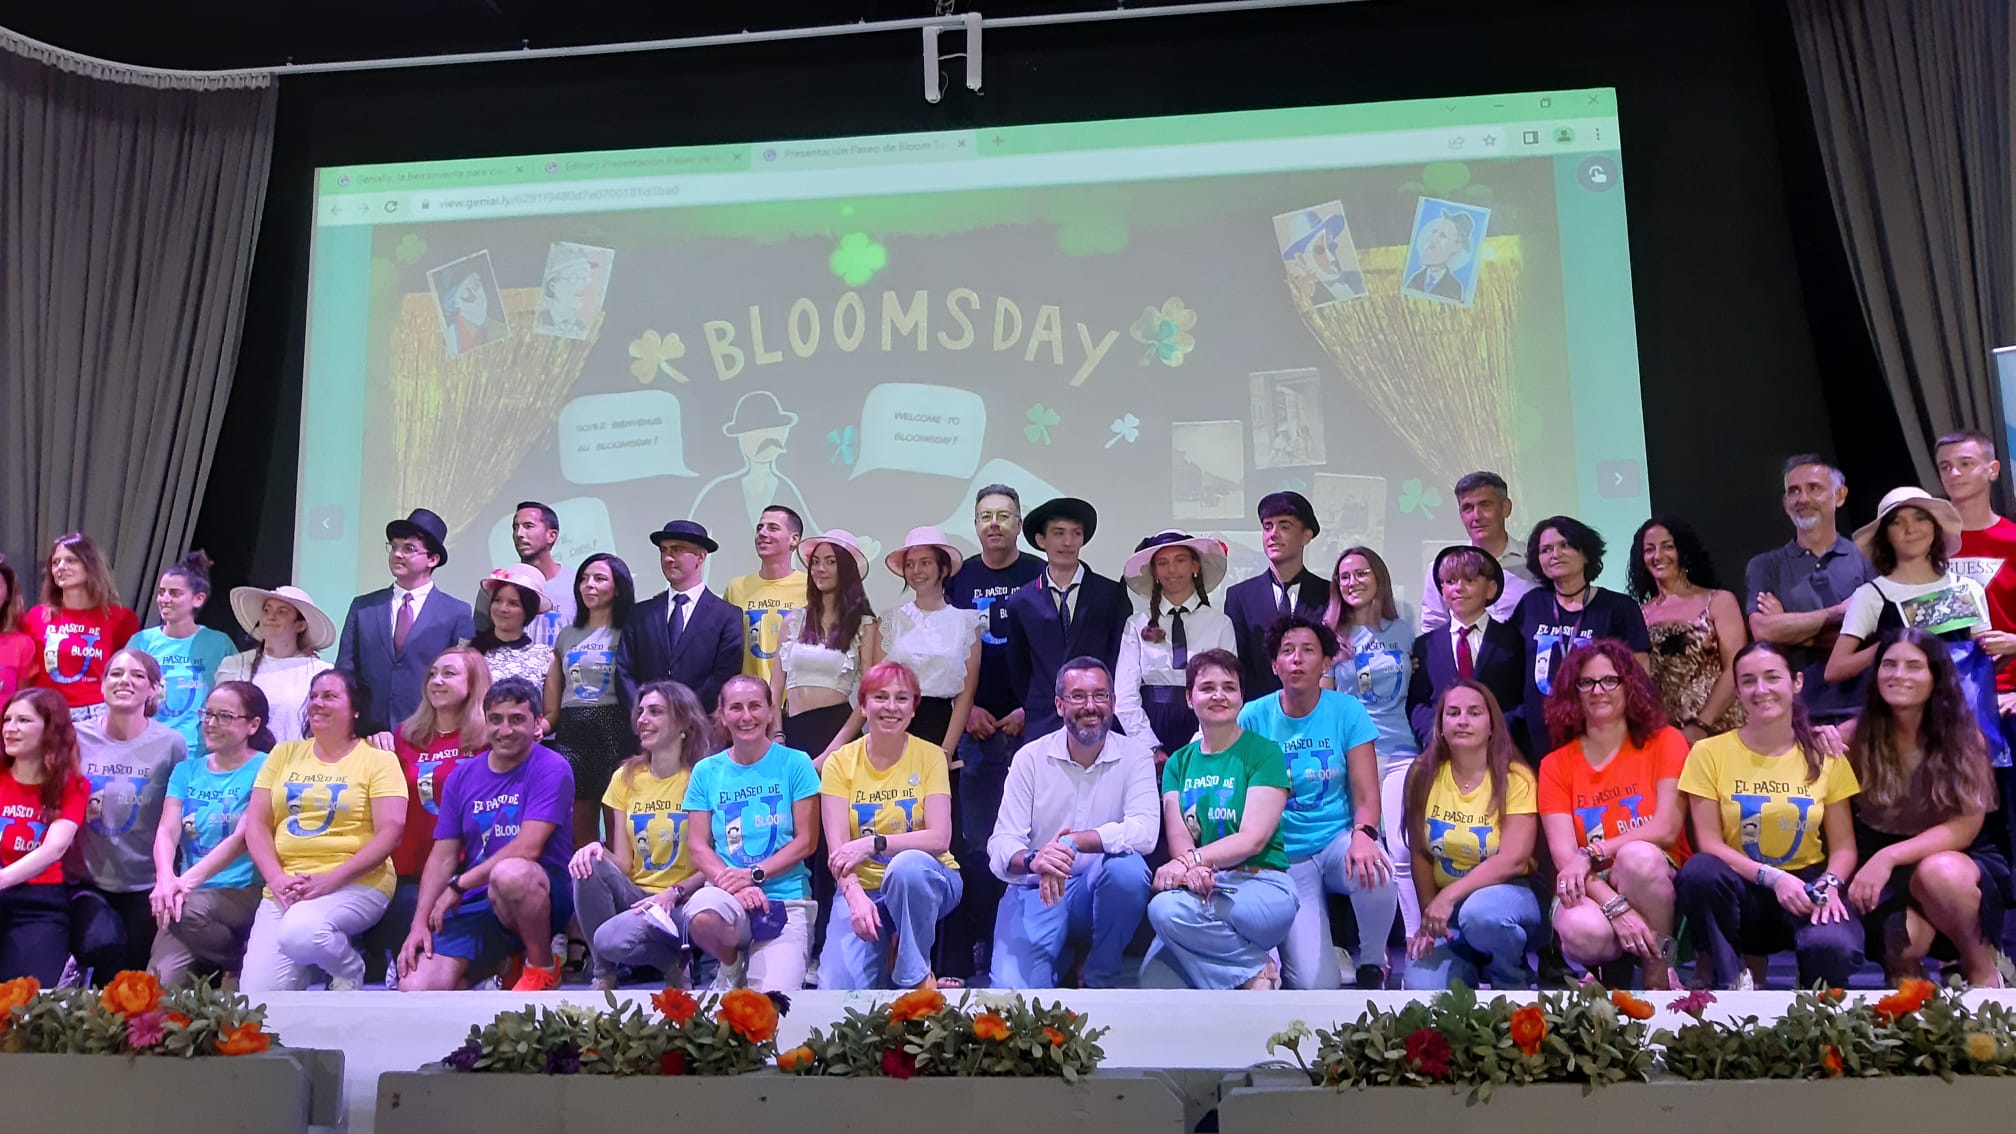 Instituto Tolosa Bloomsday